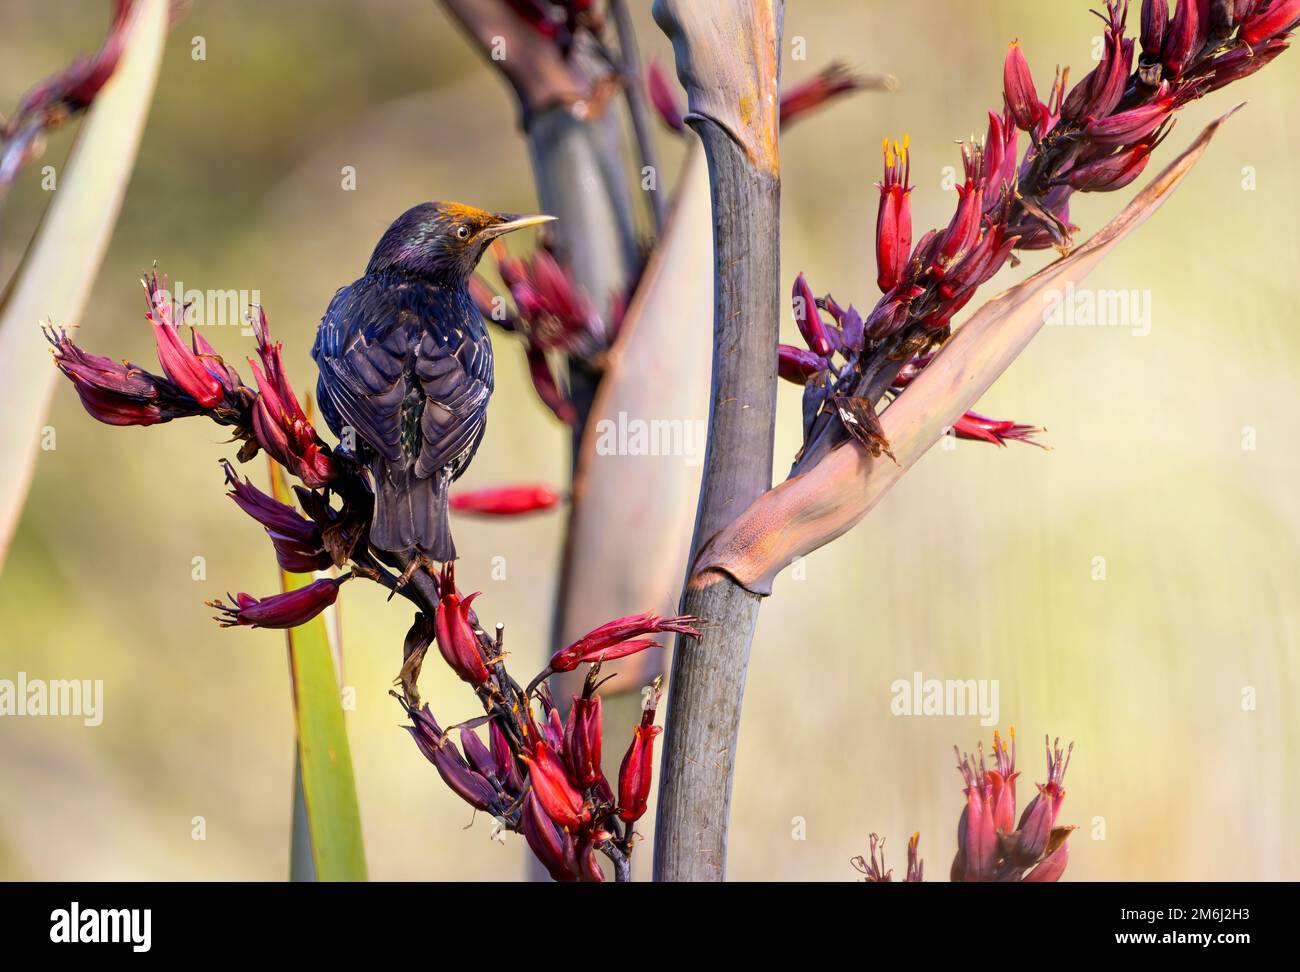 Birding and Birdwatching: European Starling feeding from the uniqe New Zealand's Flax flowers in summer. Stock Photo